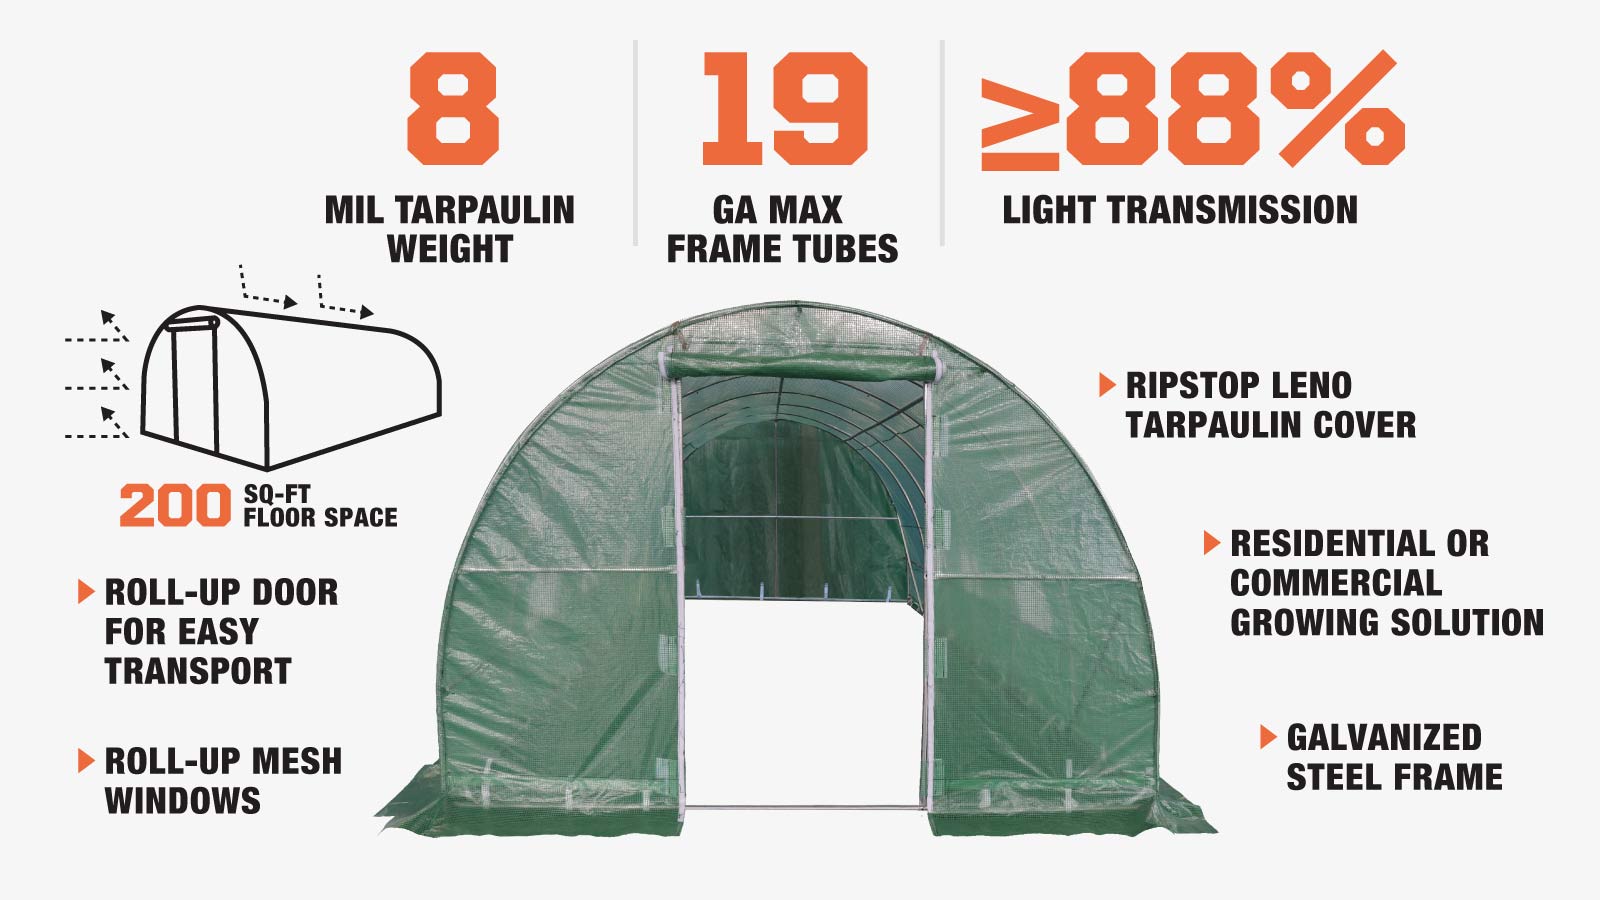 TMG Industrial 10' x 20' Tunnel Greenhouse Grow Tent with Ripstop Leno Cover, Cold Frame, Roll-Up Mesh Windows, Round Top Roof, TMG-GH1020R-description-image